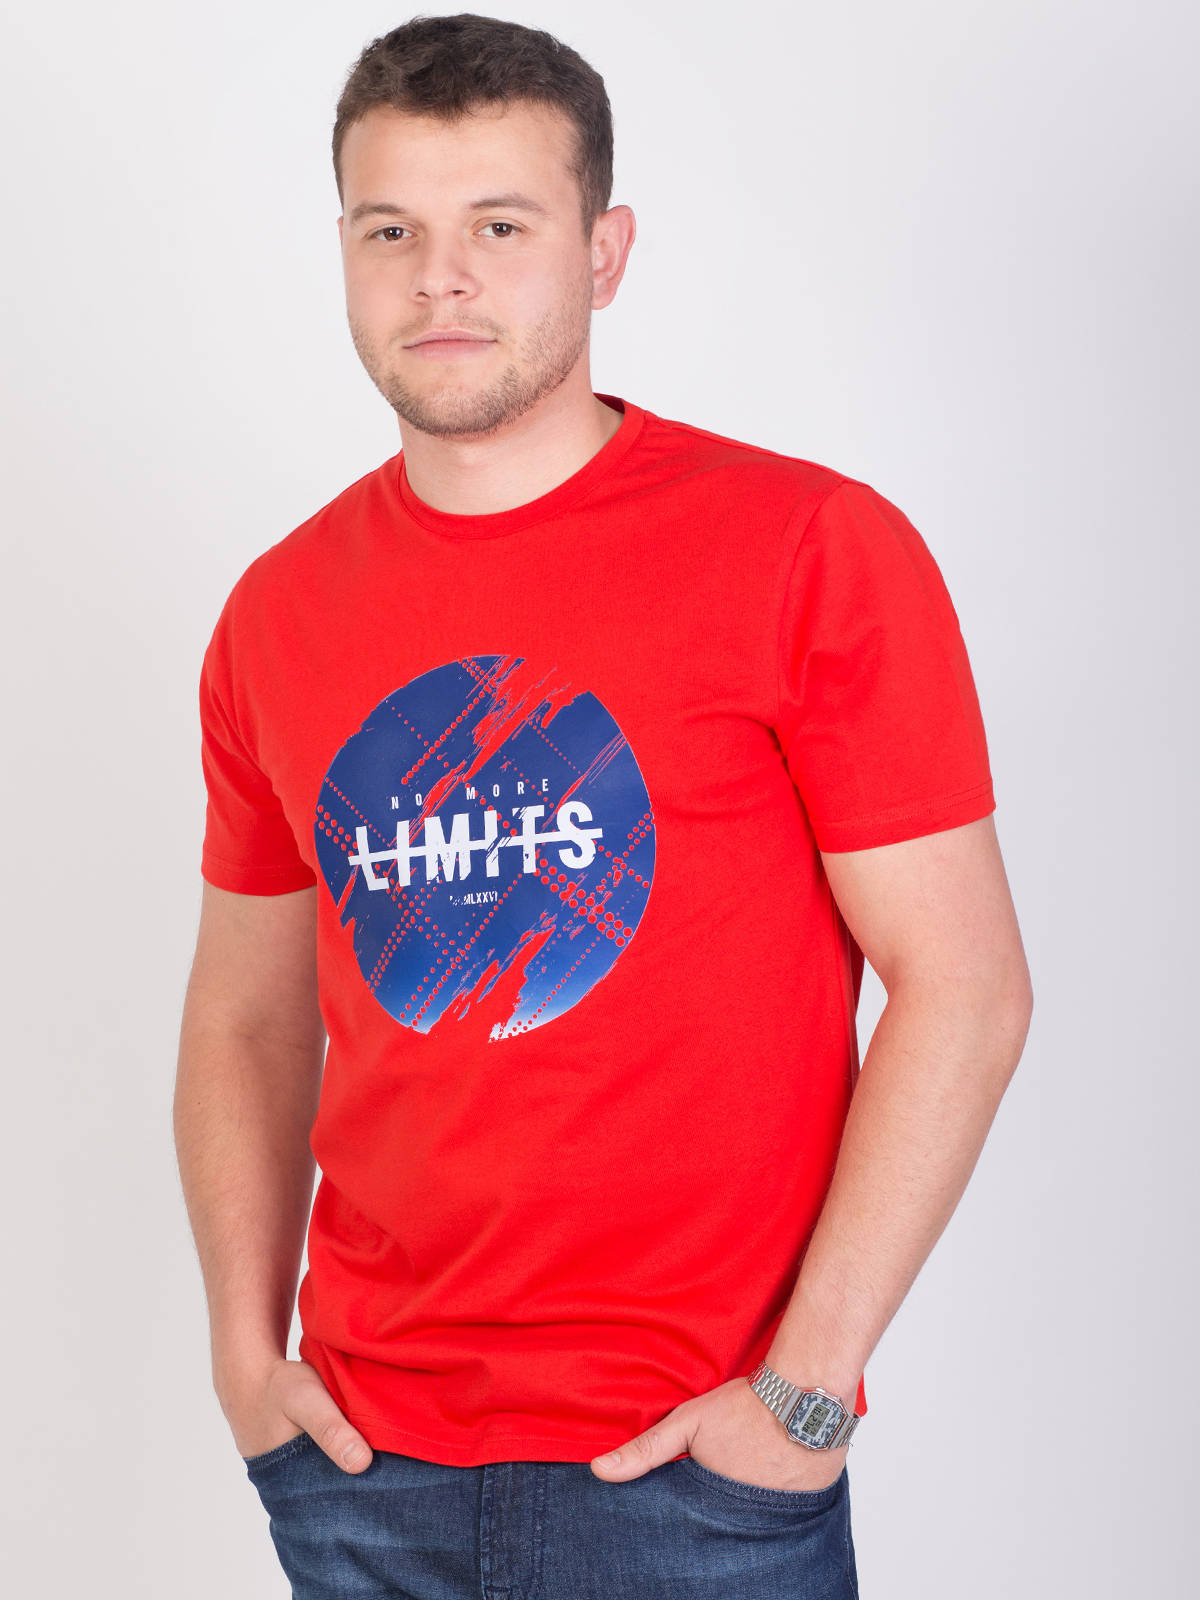 Red tshirt with blue print - 96438 € 16.31 img3